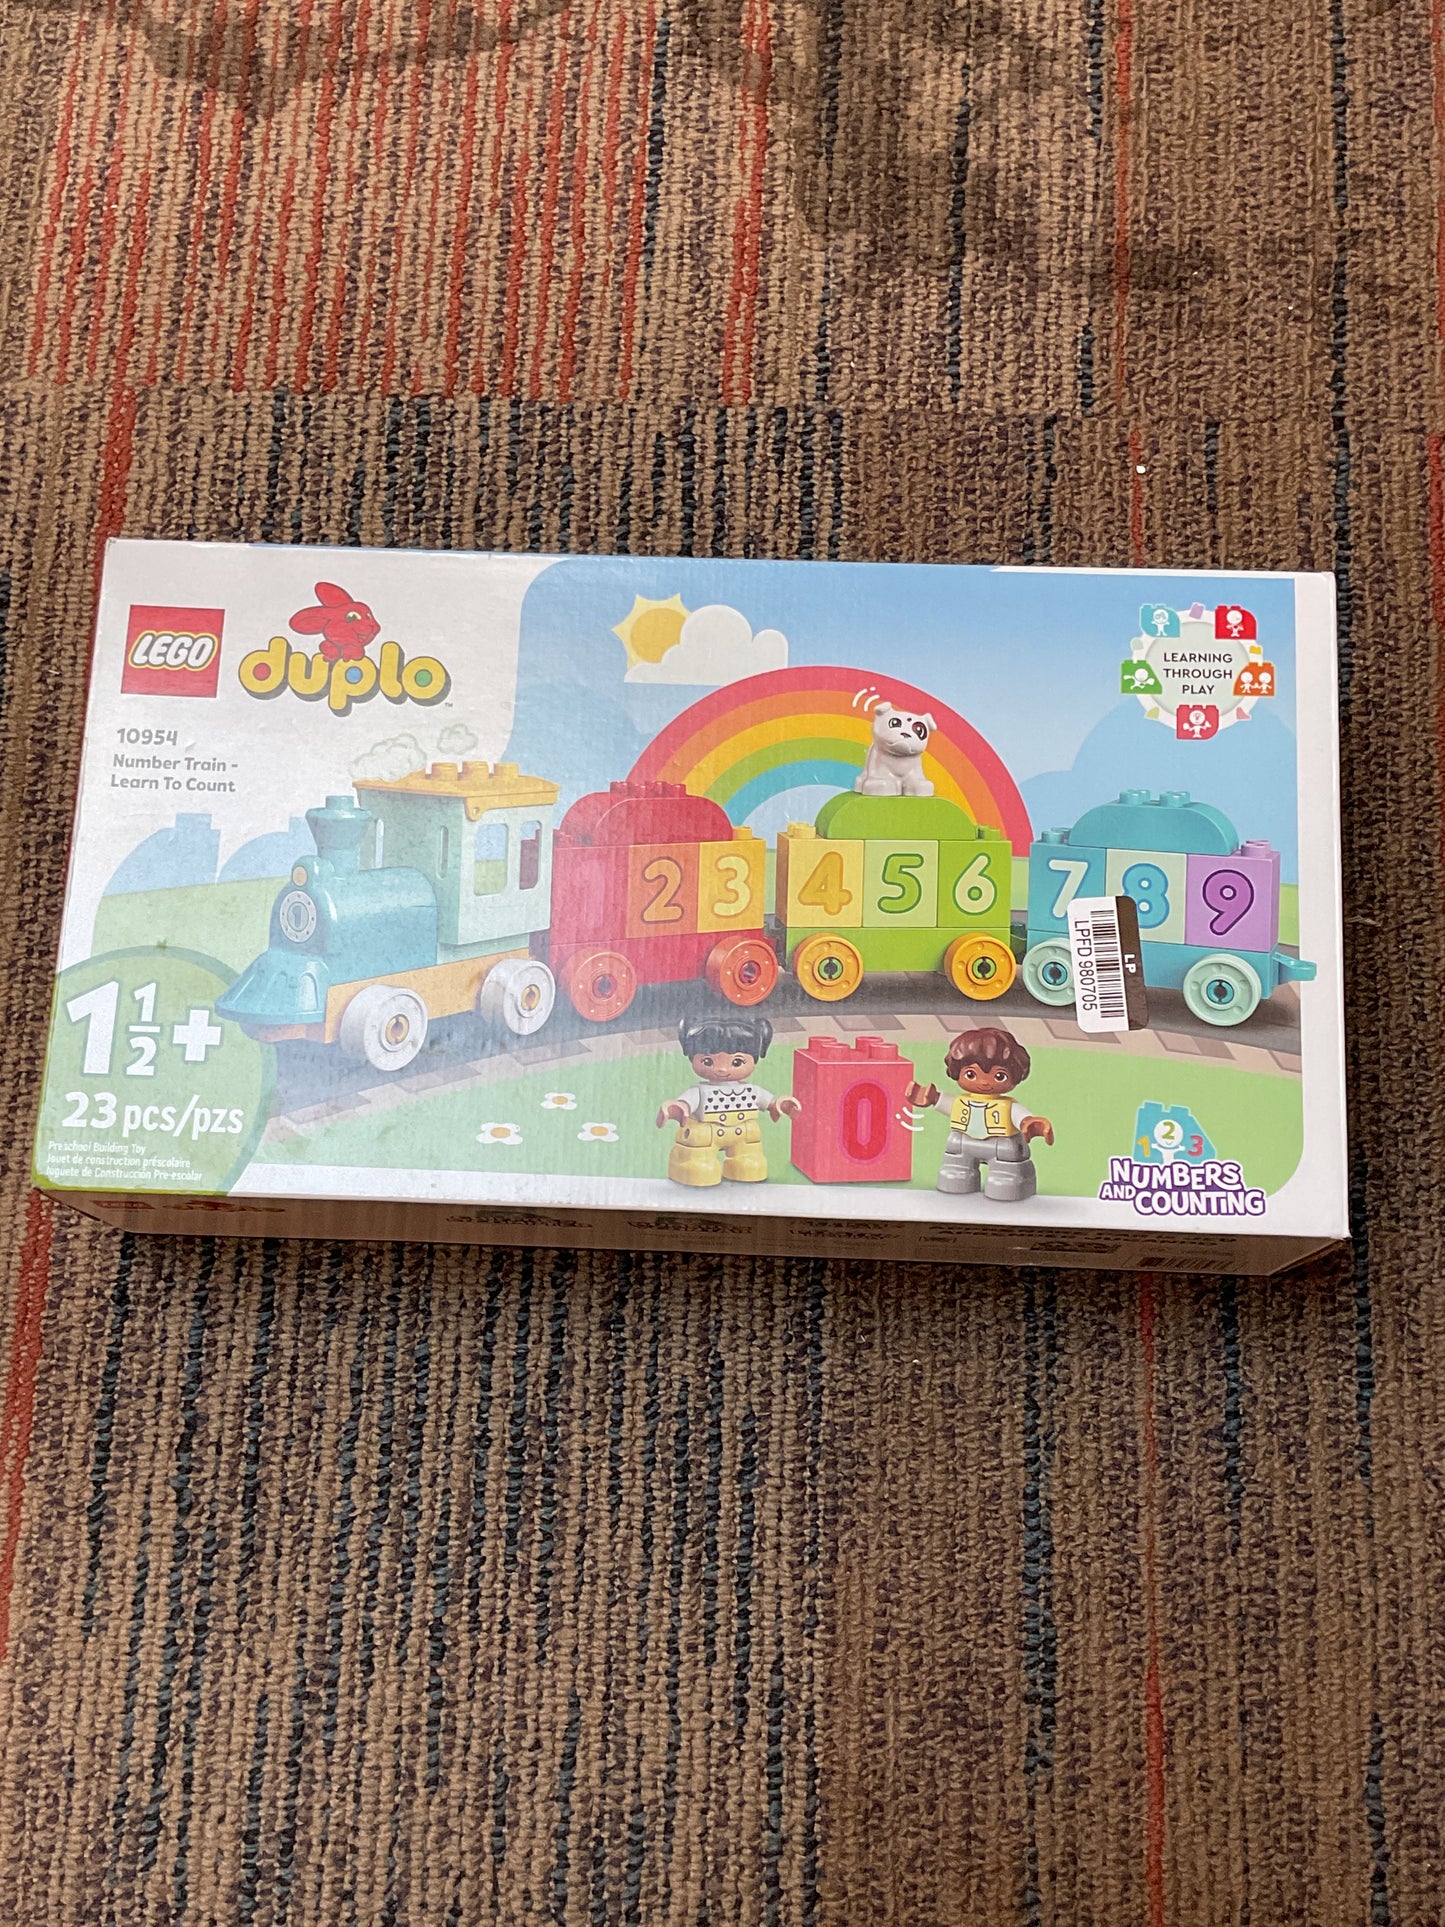 LEGO DUPLO My First Number Train Toy 10954